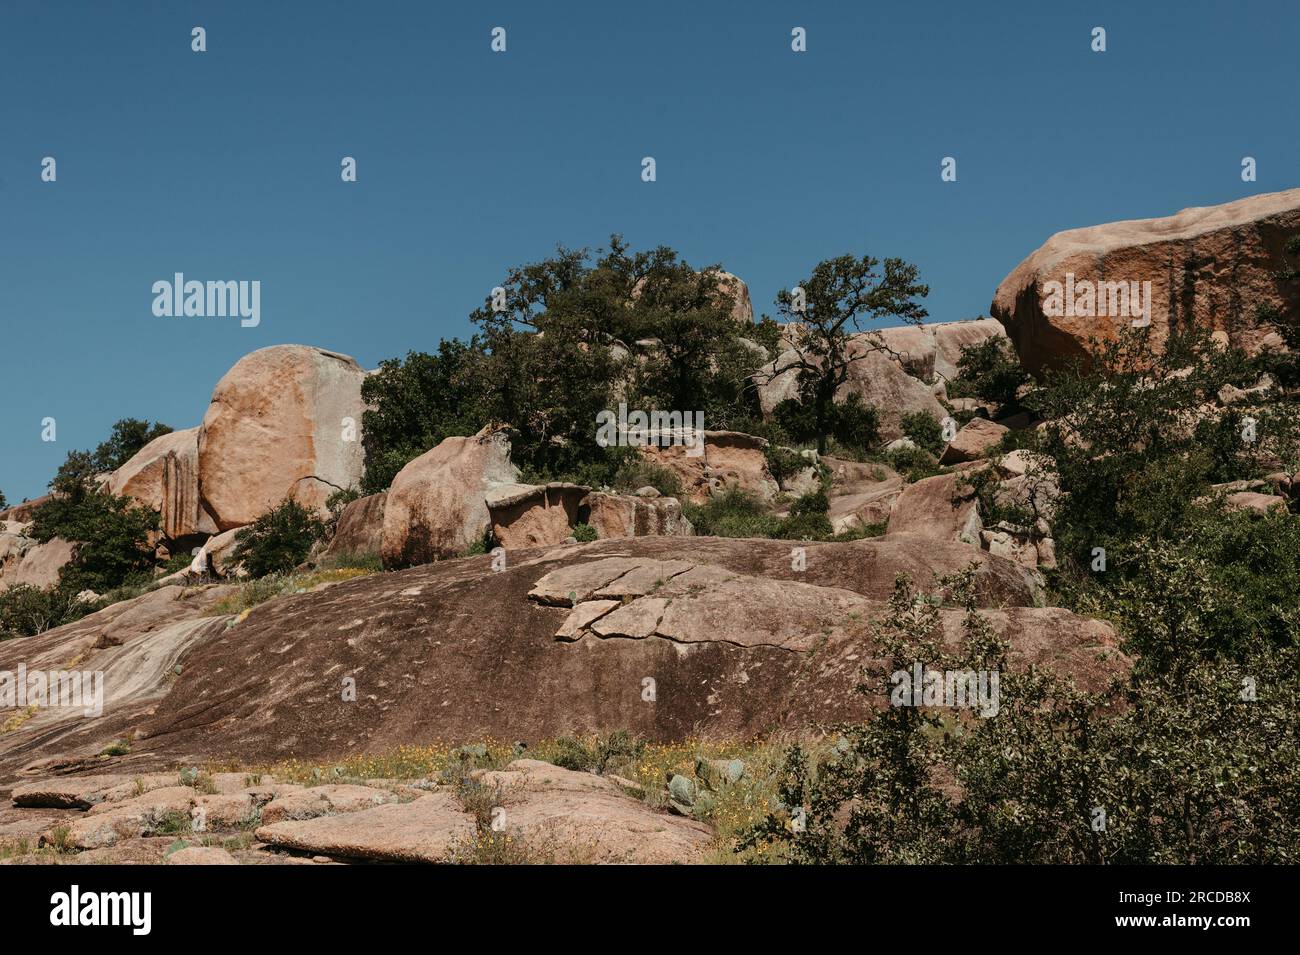 Boulders at Enchanted Rock State Natural Area in Texas Stock Photo